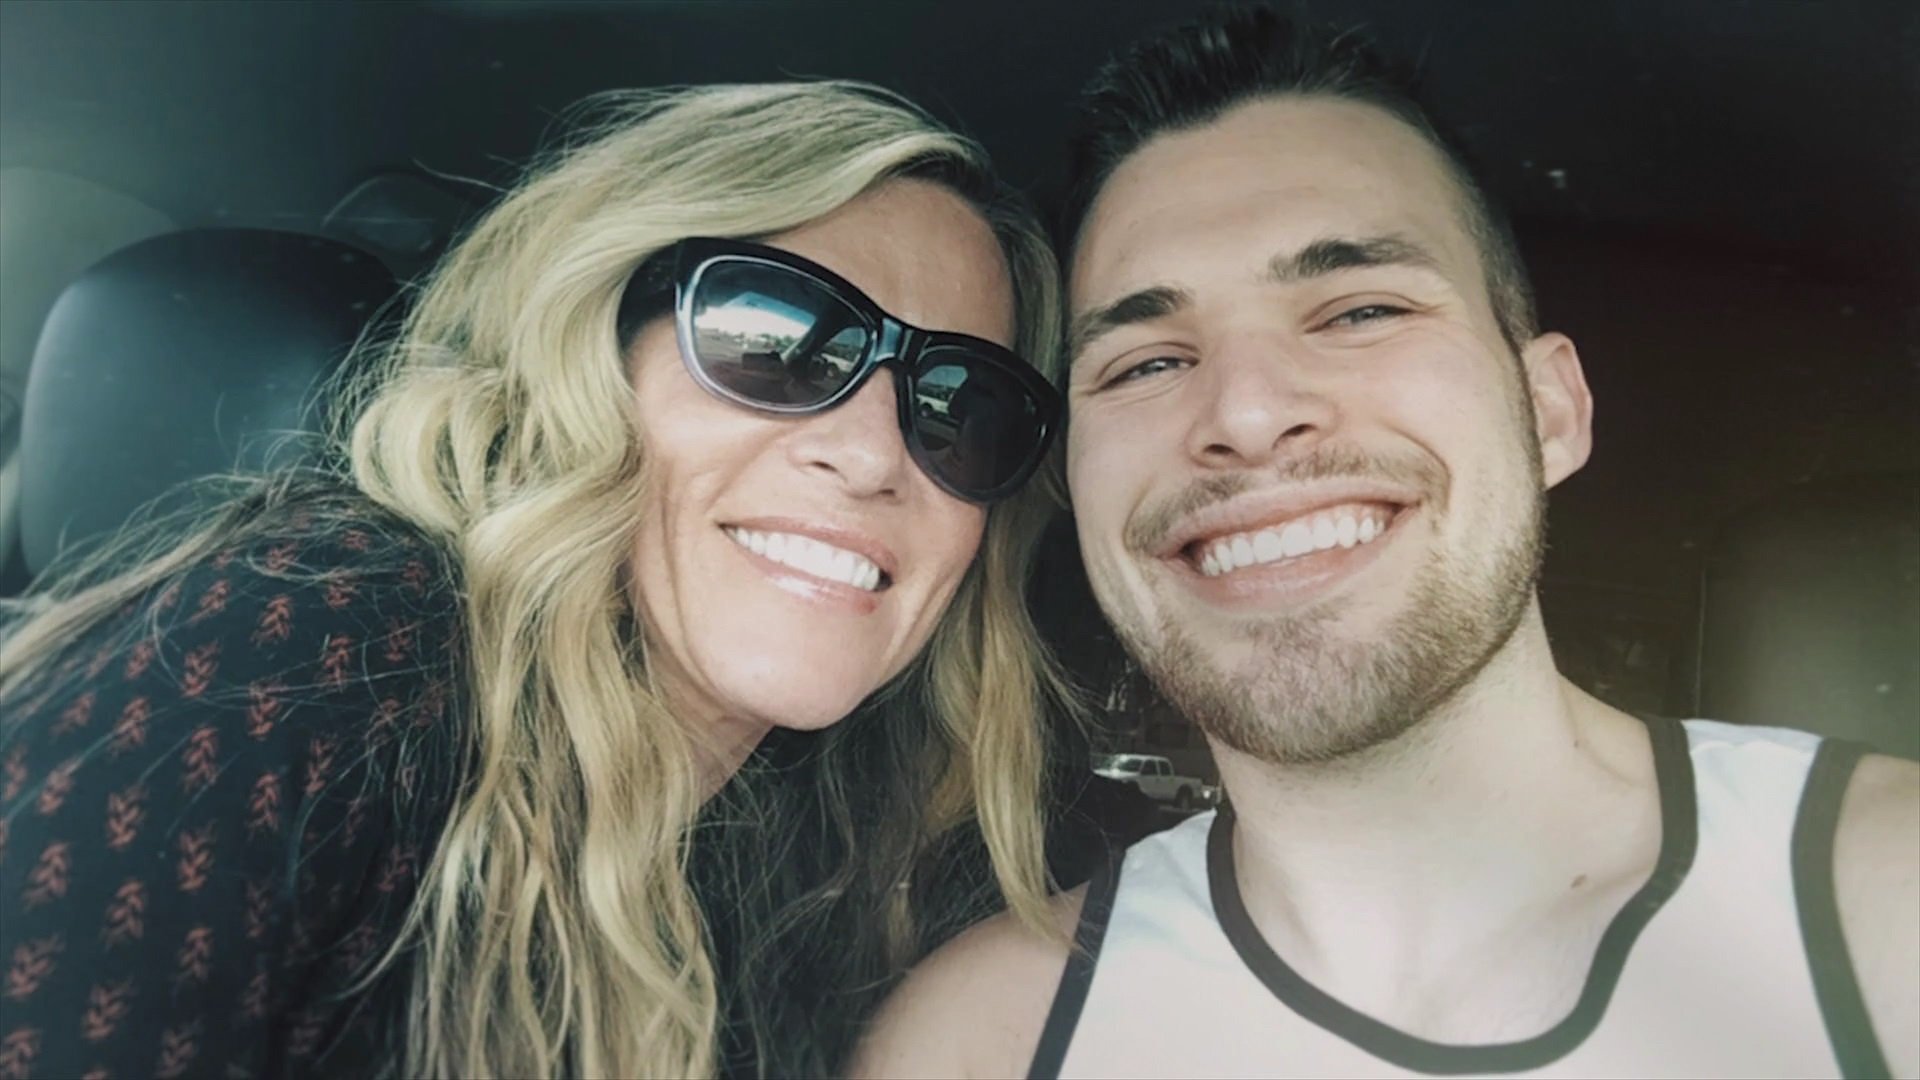 Lori Vallow and Cobly Ryan smiling together for a selfie used in 'Sins of Our Mother' documentary on Netflix